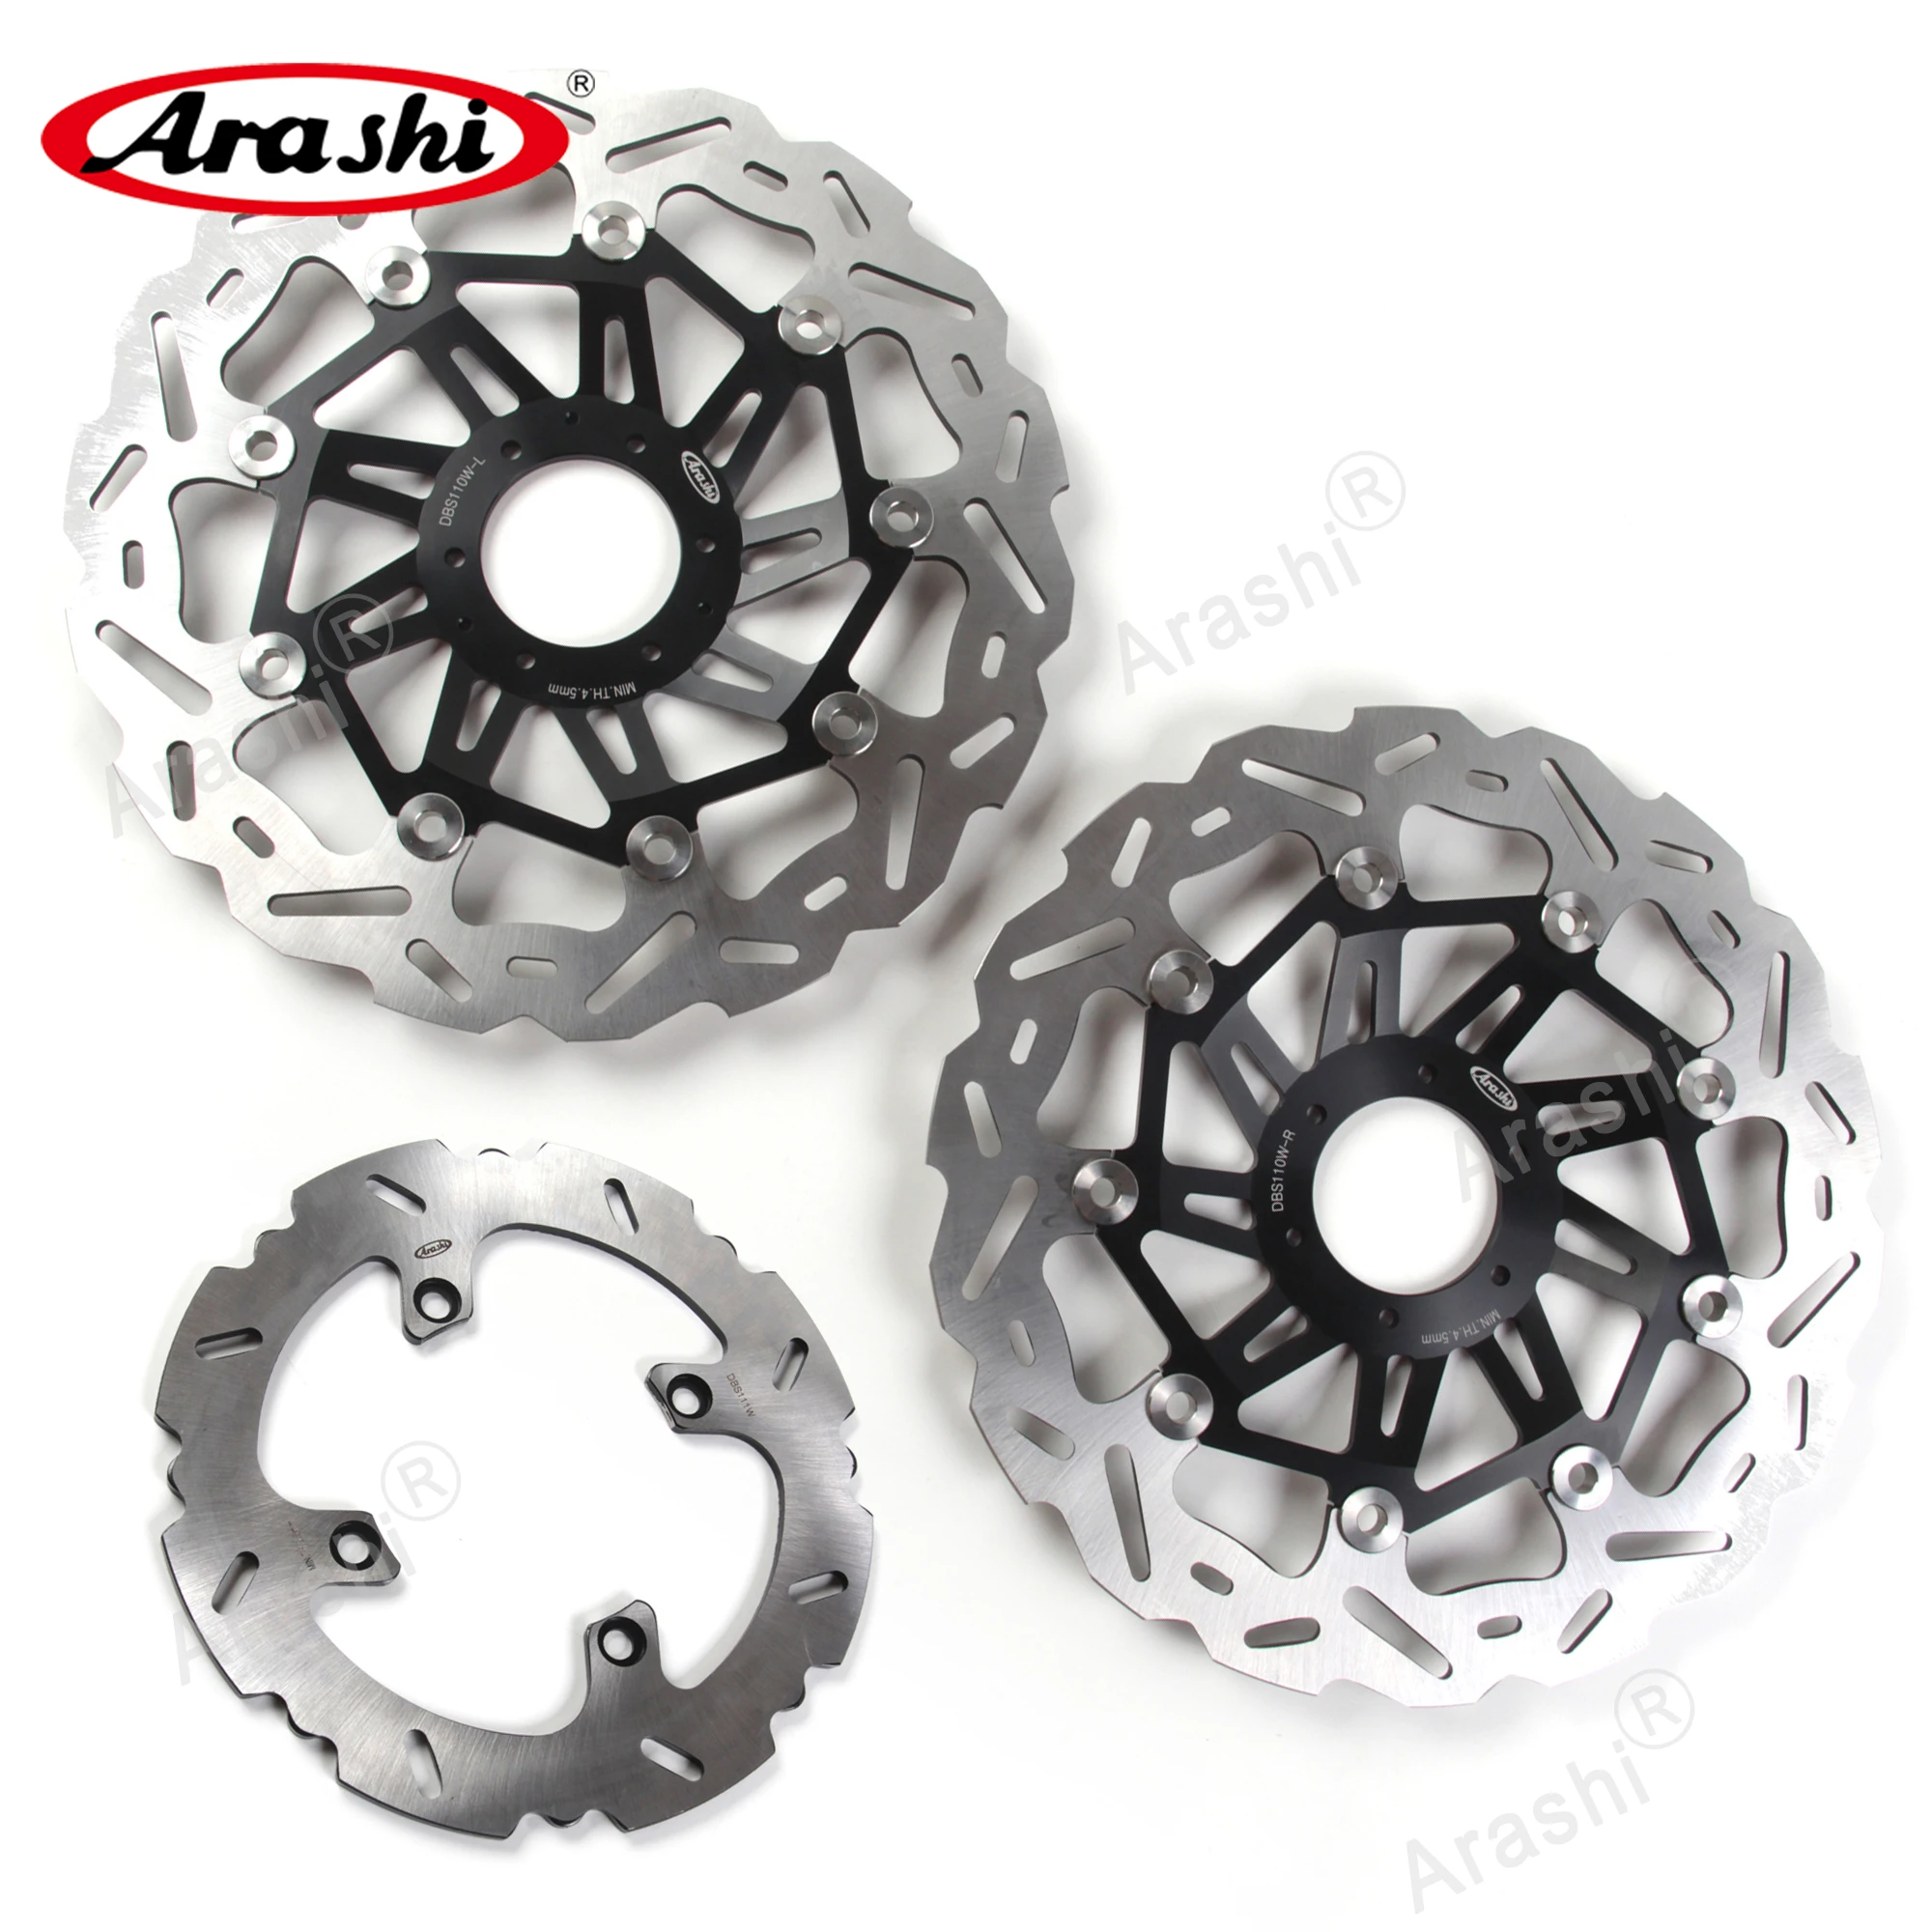 

ARASHI CRF1000L CNC Floating Front Rear Brake Disc Rotors For HONDA CRF L AFRICA TWIN ADV ABS 1000 2018 2019 CRF1000 Accessories